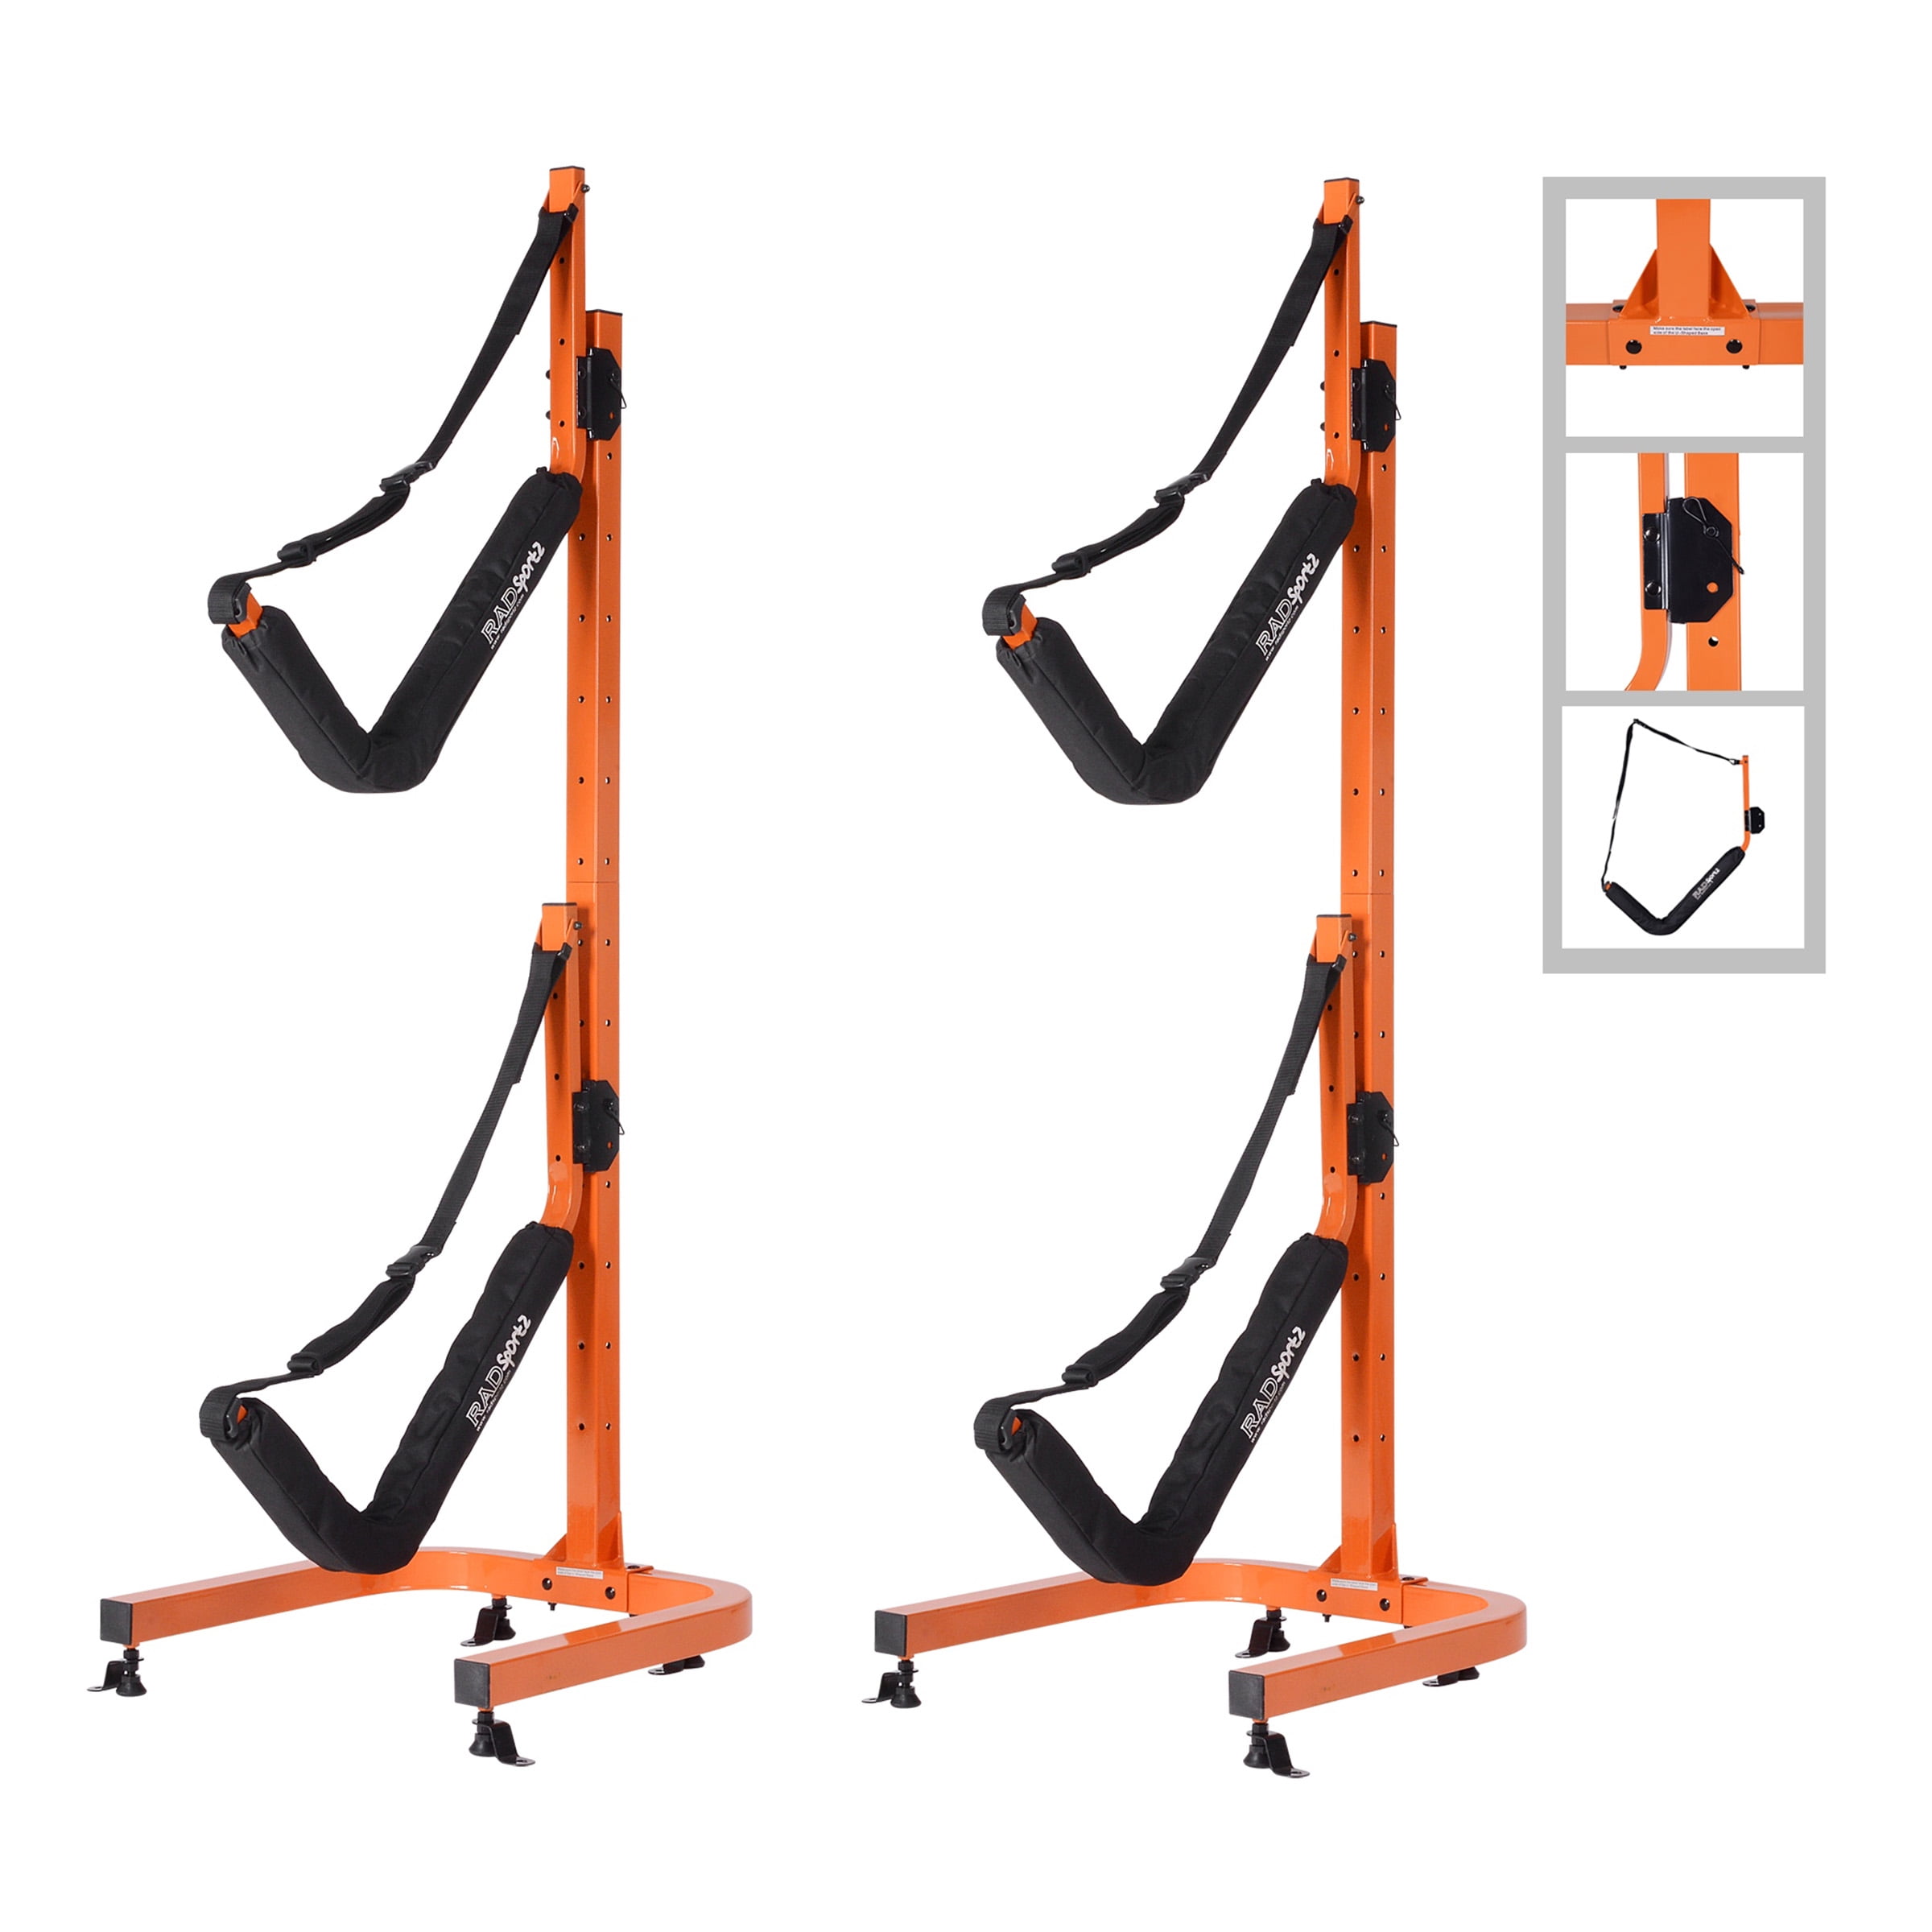 max wt. 175 lbs Metal Holds 2 Kayaks Hypeshops Double Kayak Stand 